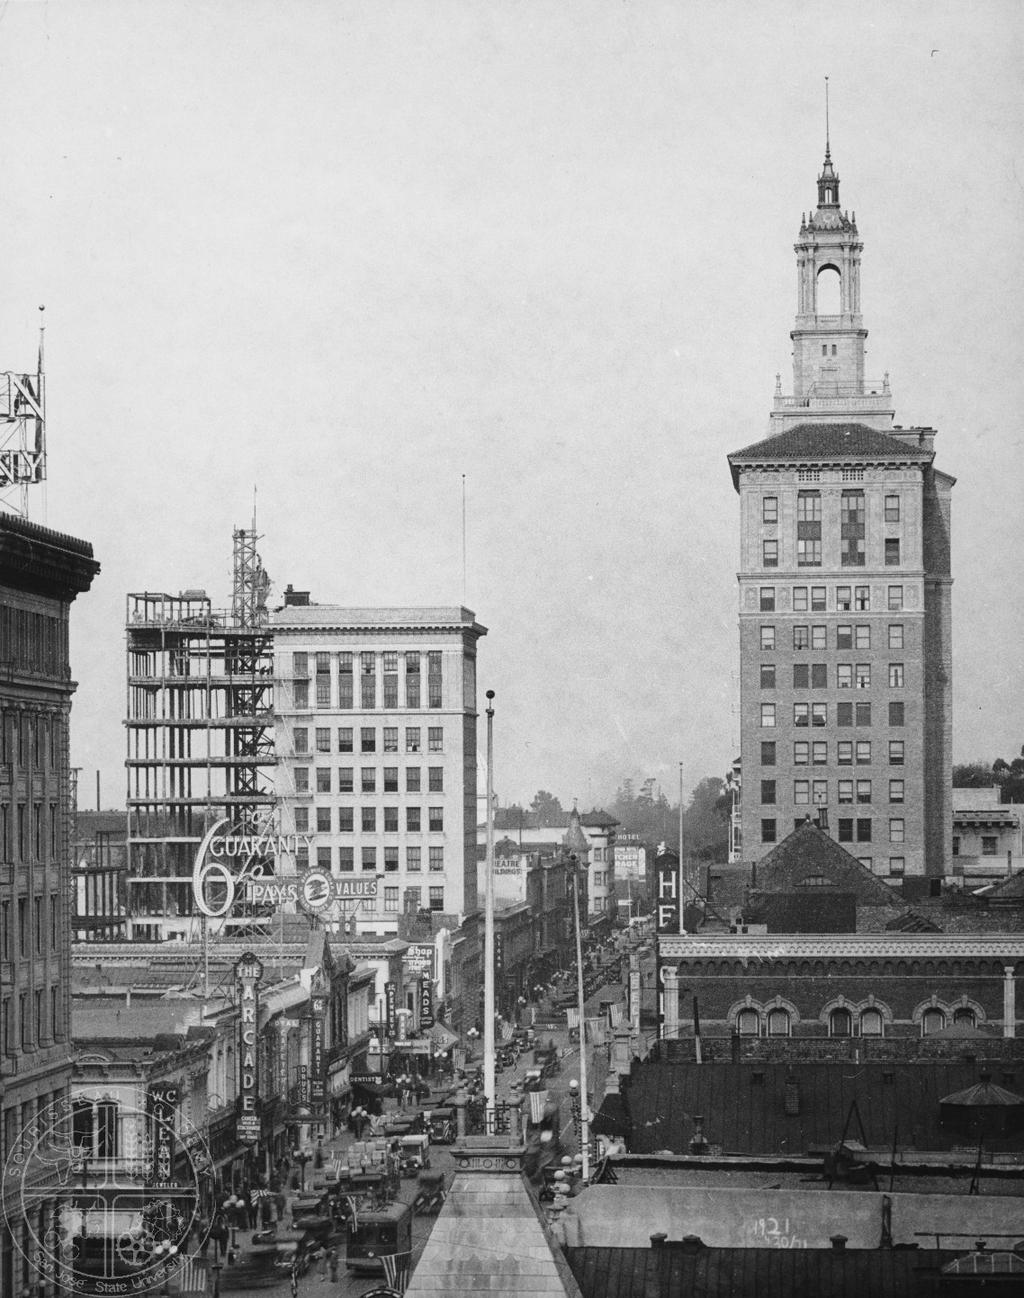 [16] South First Street 1927. Looking north on South First Street in 1927, a portion of the Garden City Bank is seen along the left edge of the image.